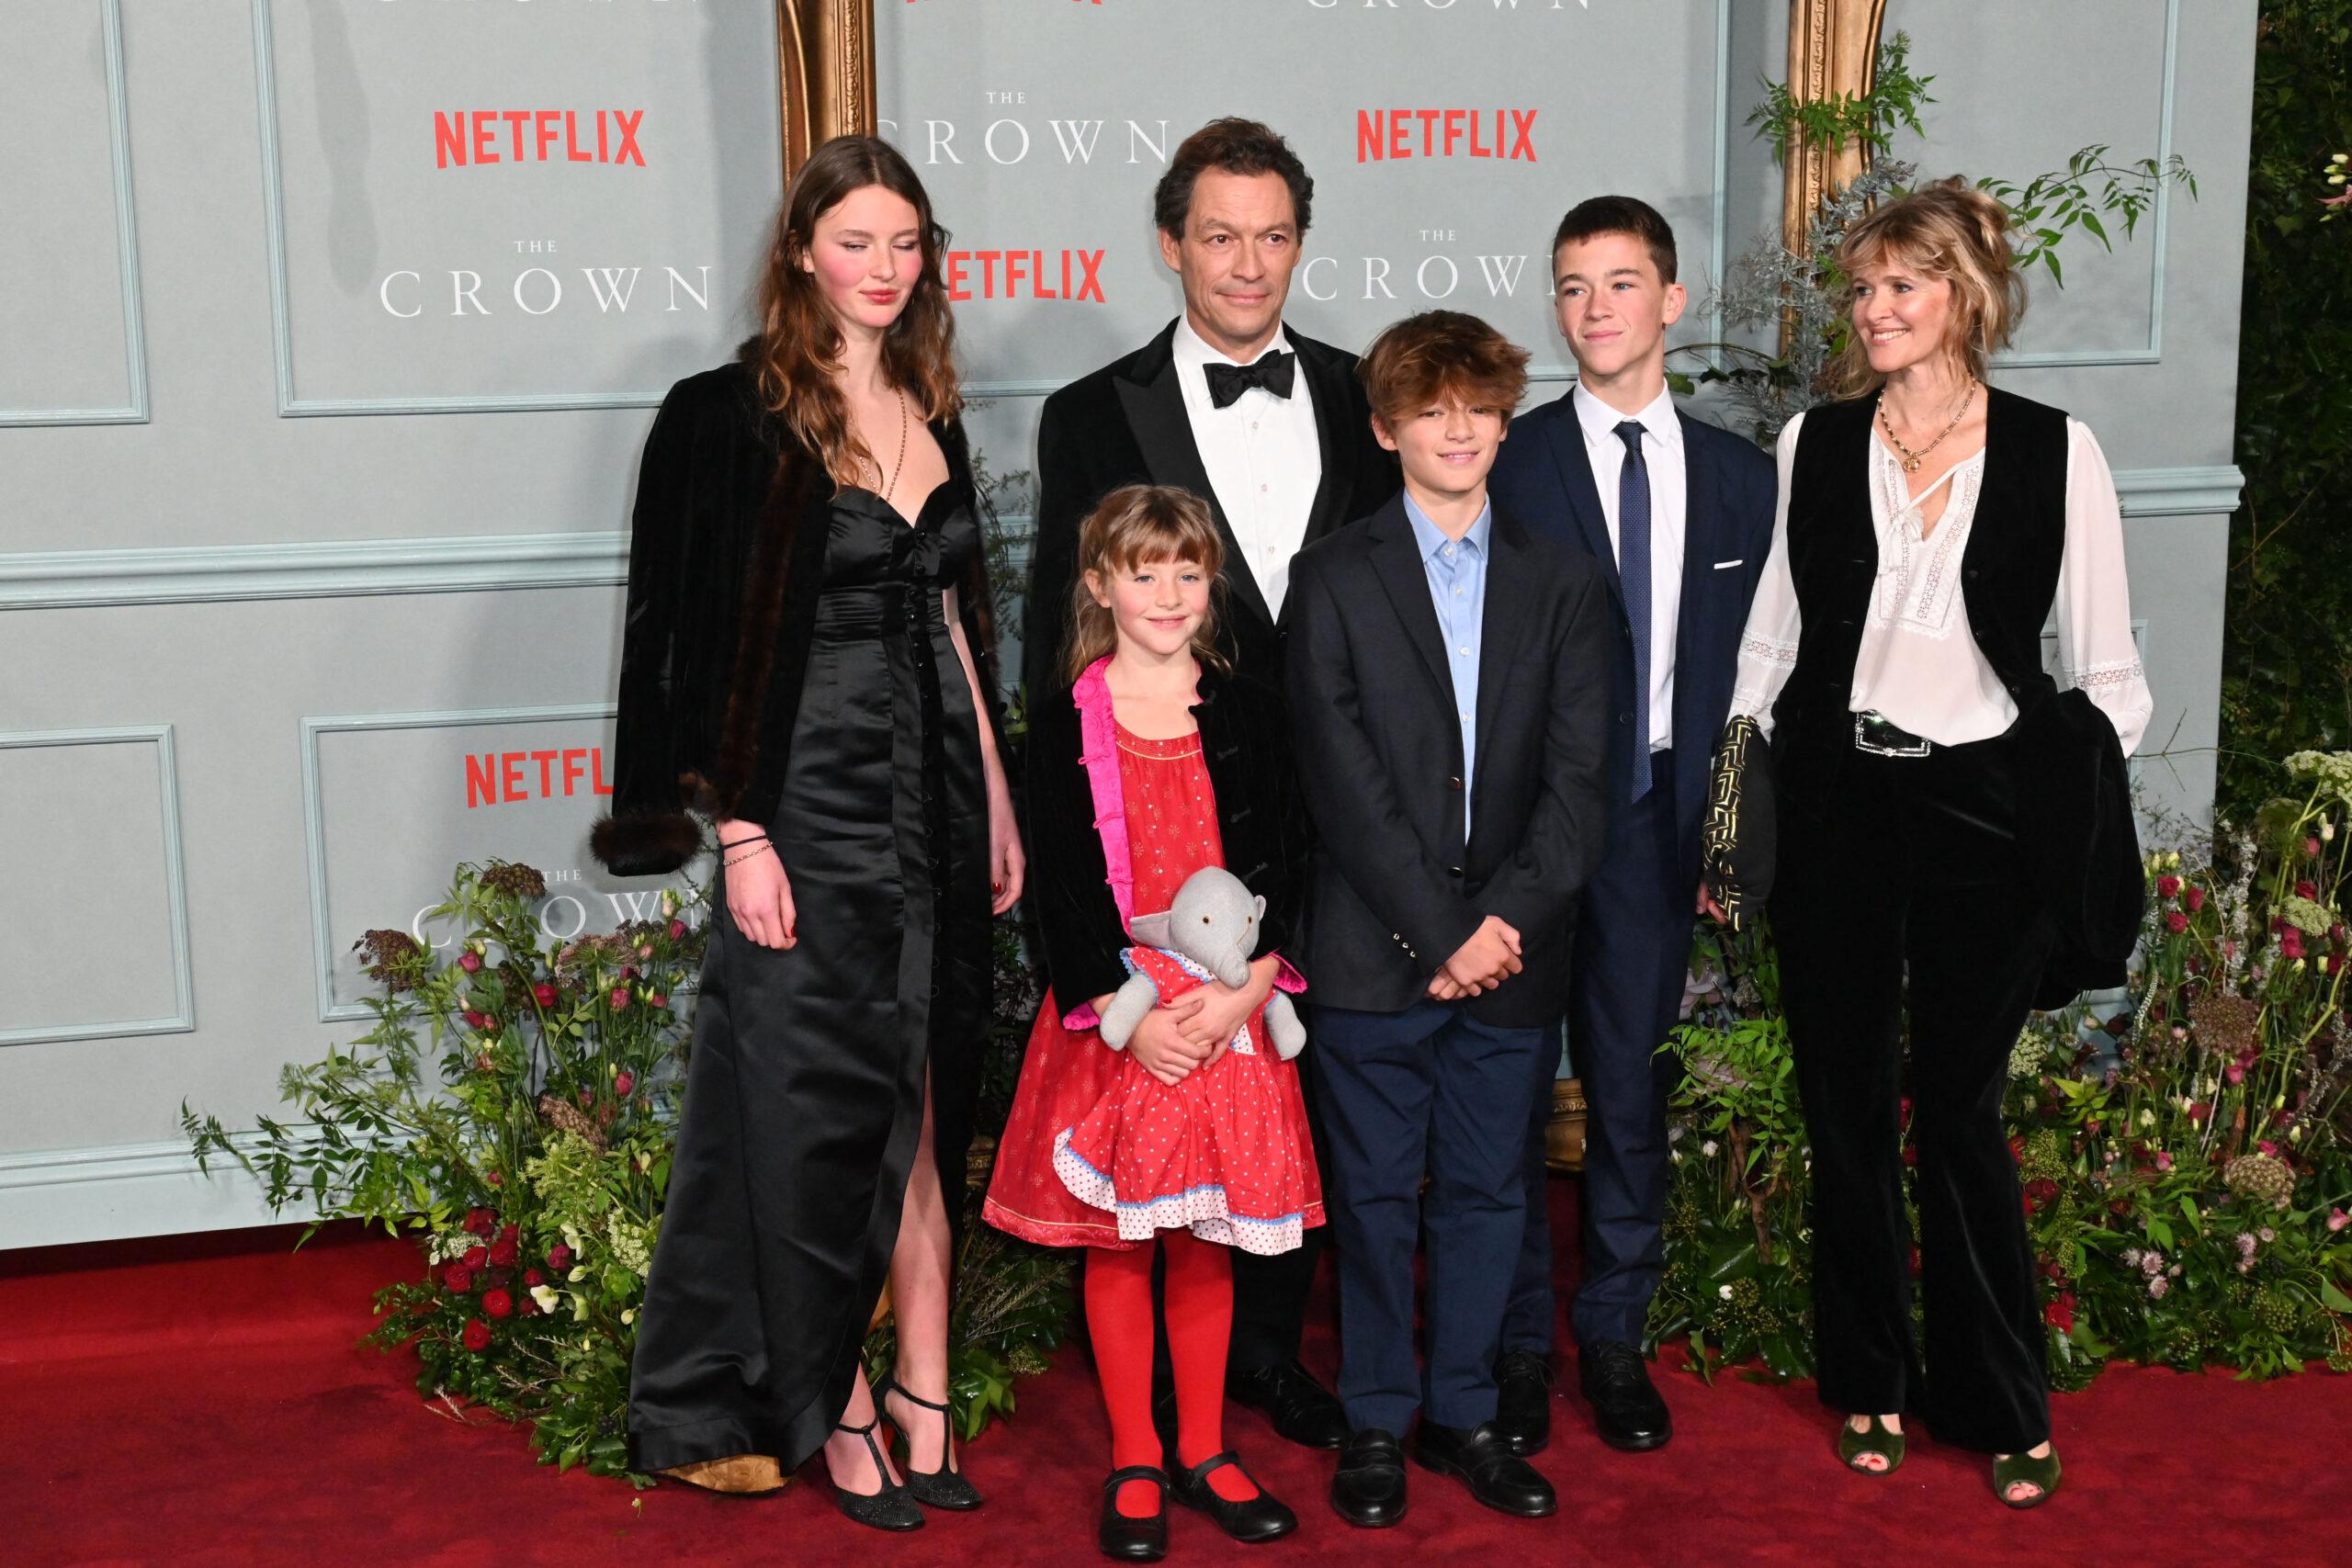 A family poses at a movie premiere.